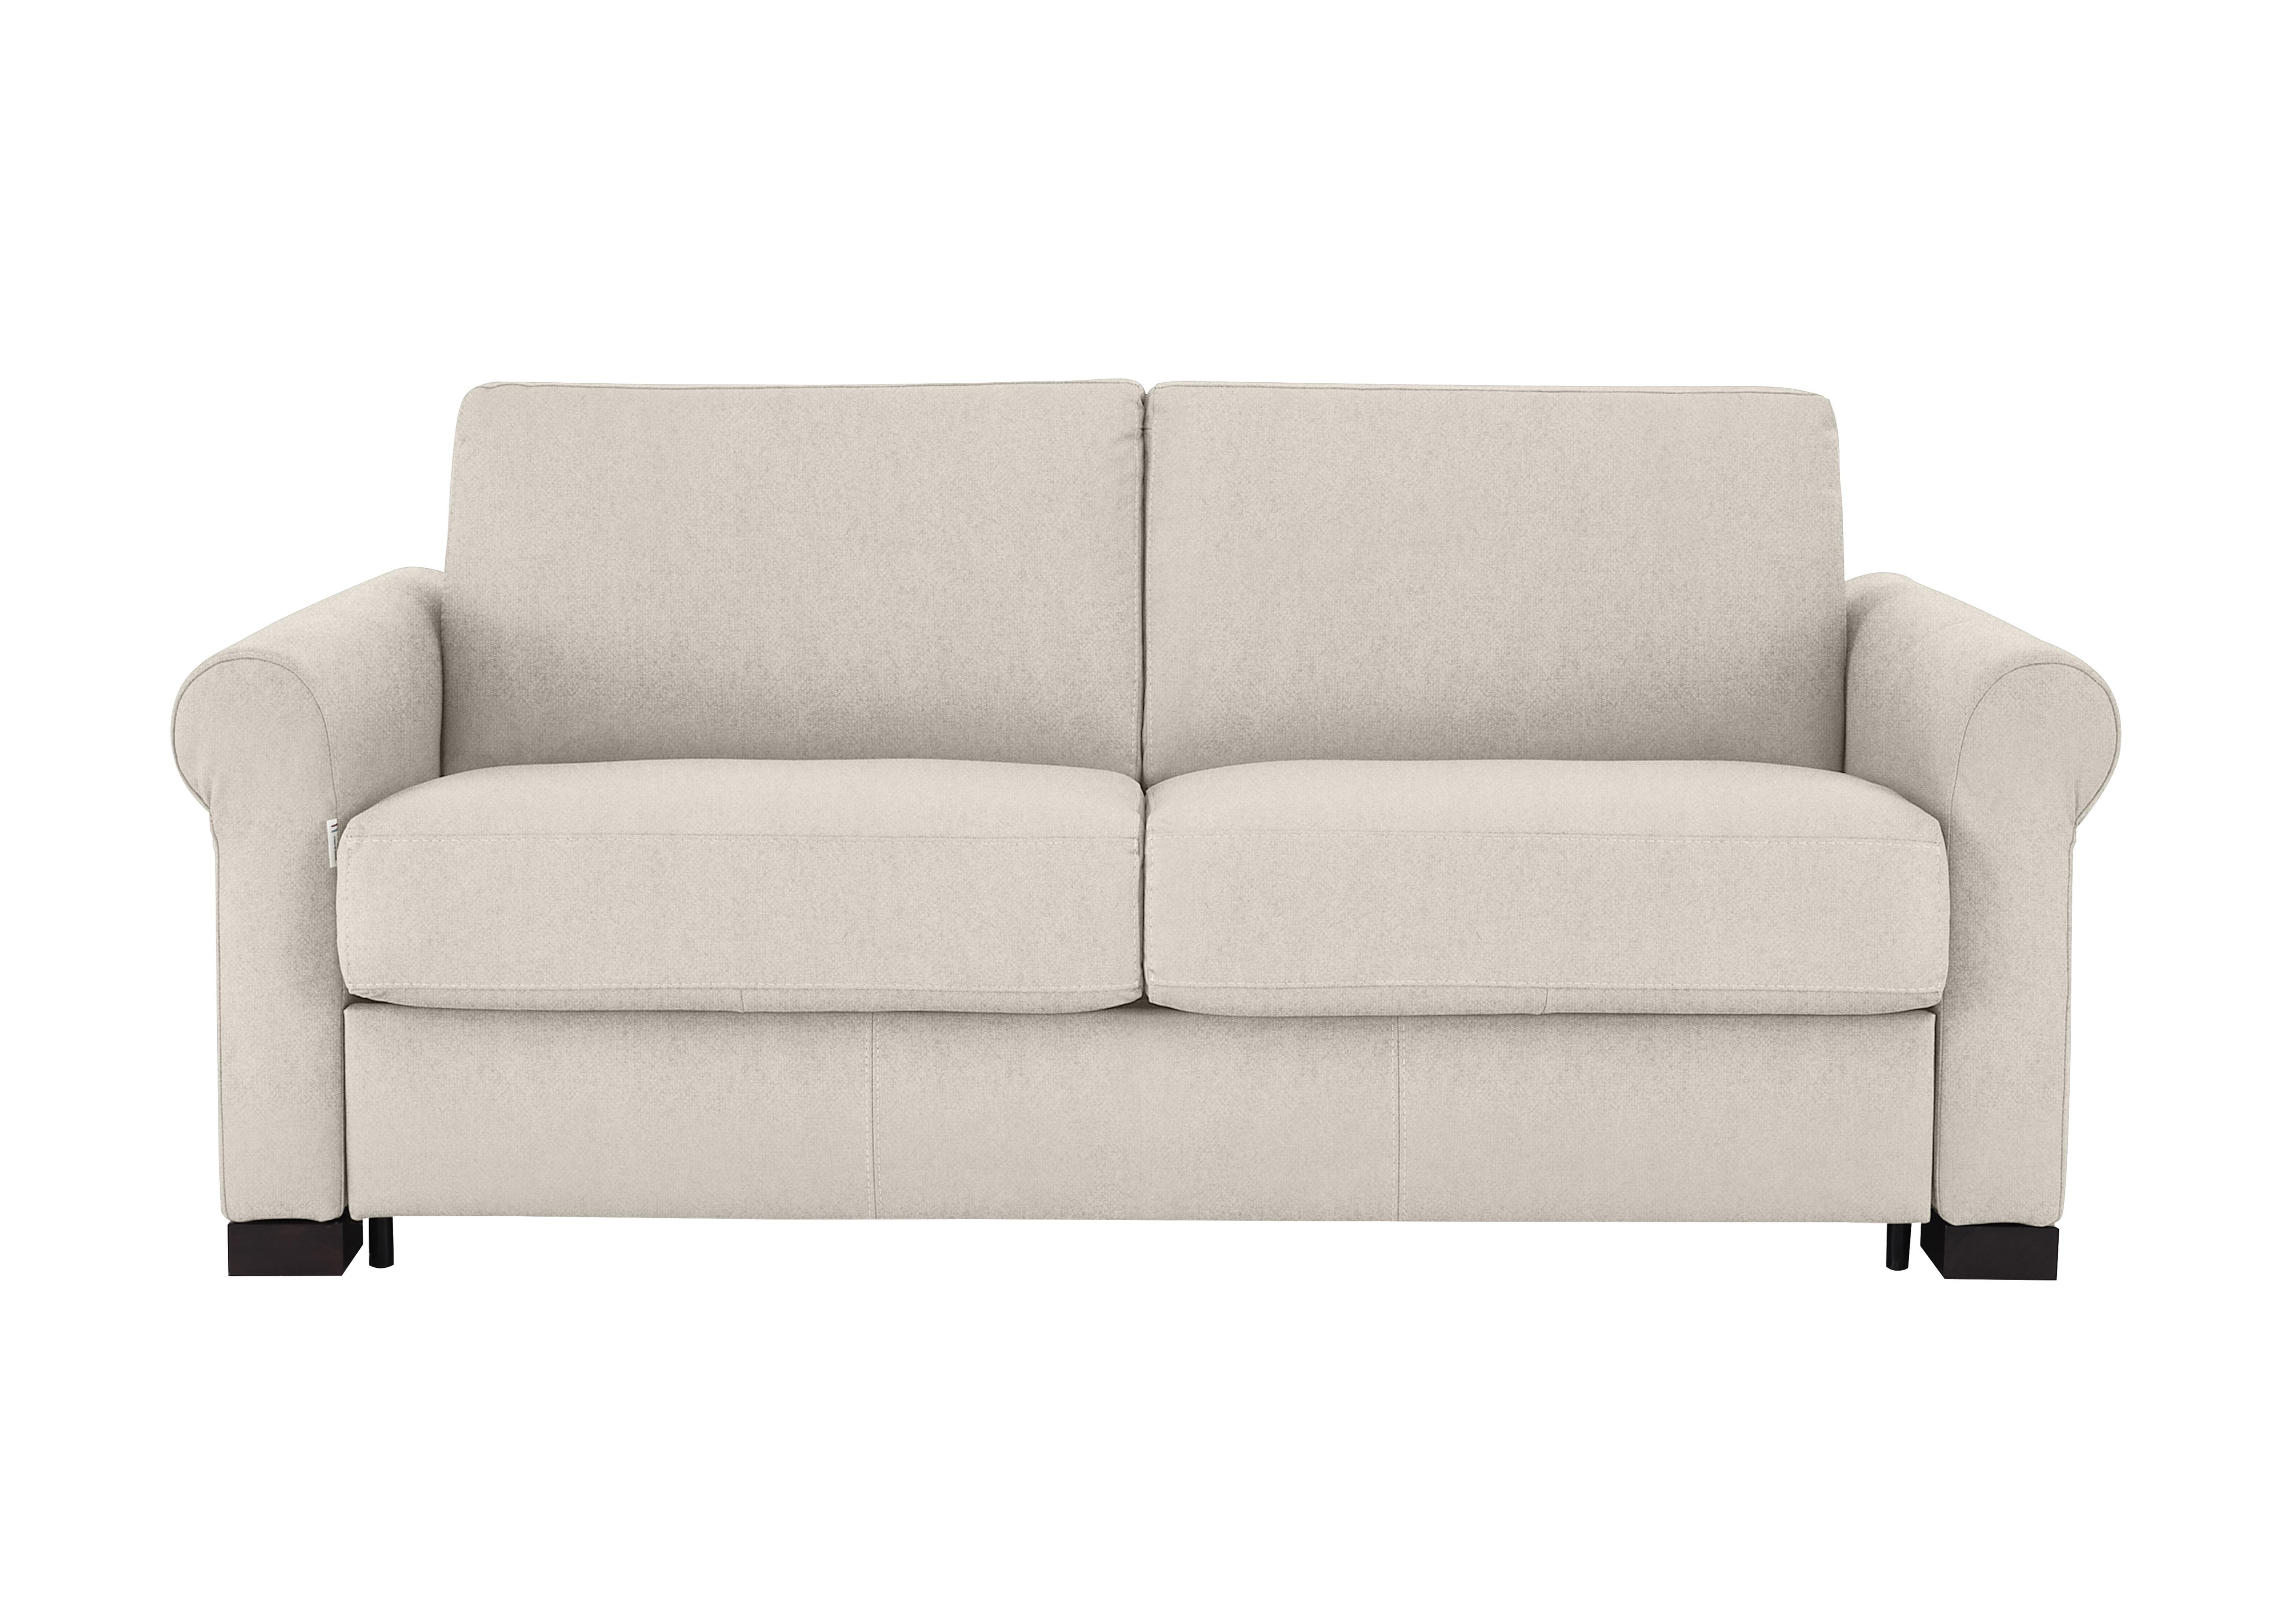 Alcova 2.5 Seater Fabric Sofa Bed with Scroll Arms in Fuente Beige on Furniture Village